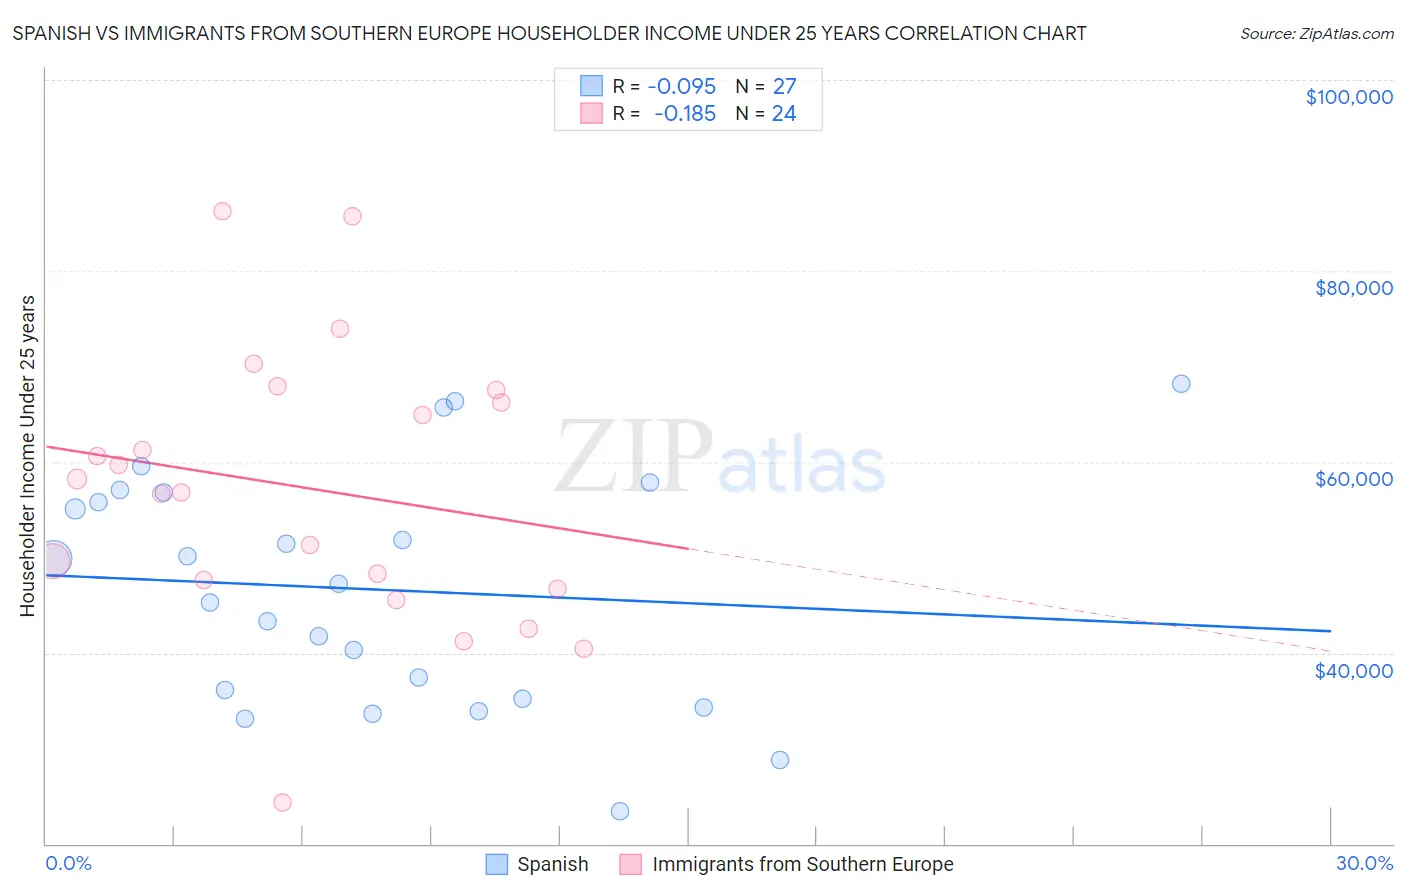 Spanish vs Immigrants from Southern Europe Householder Income Under 25 years